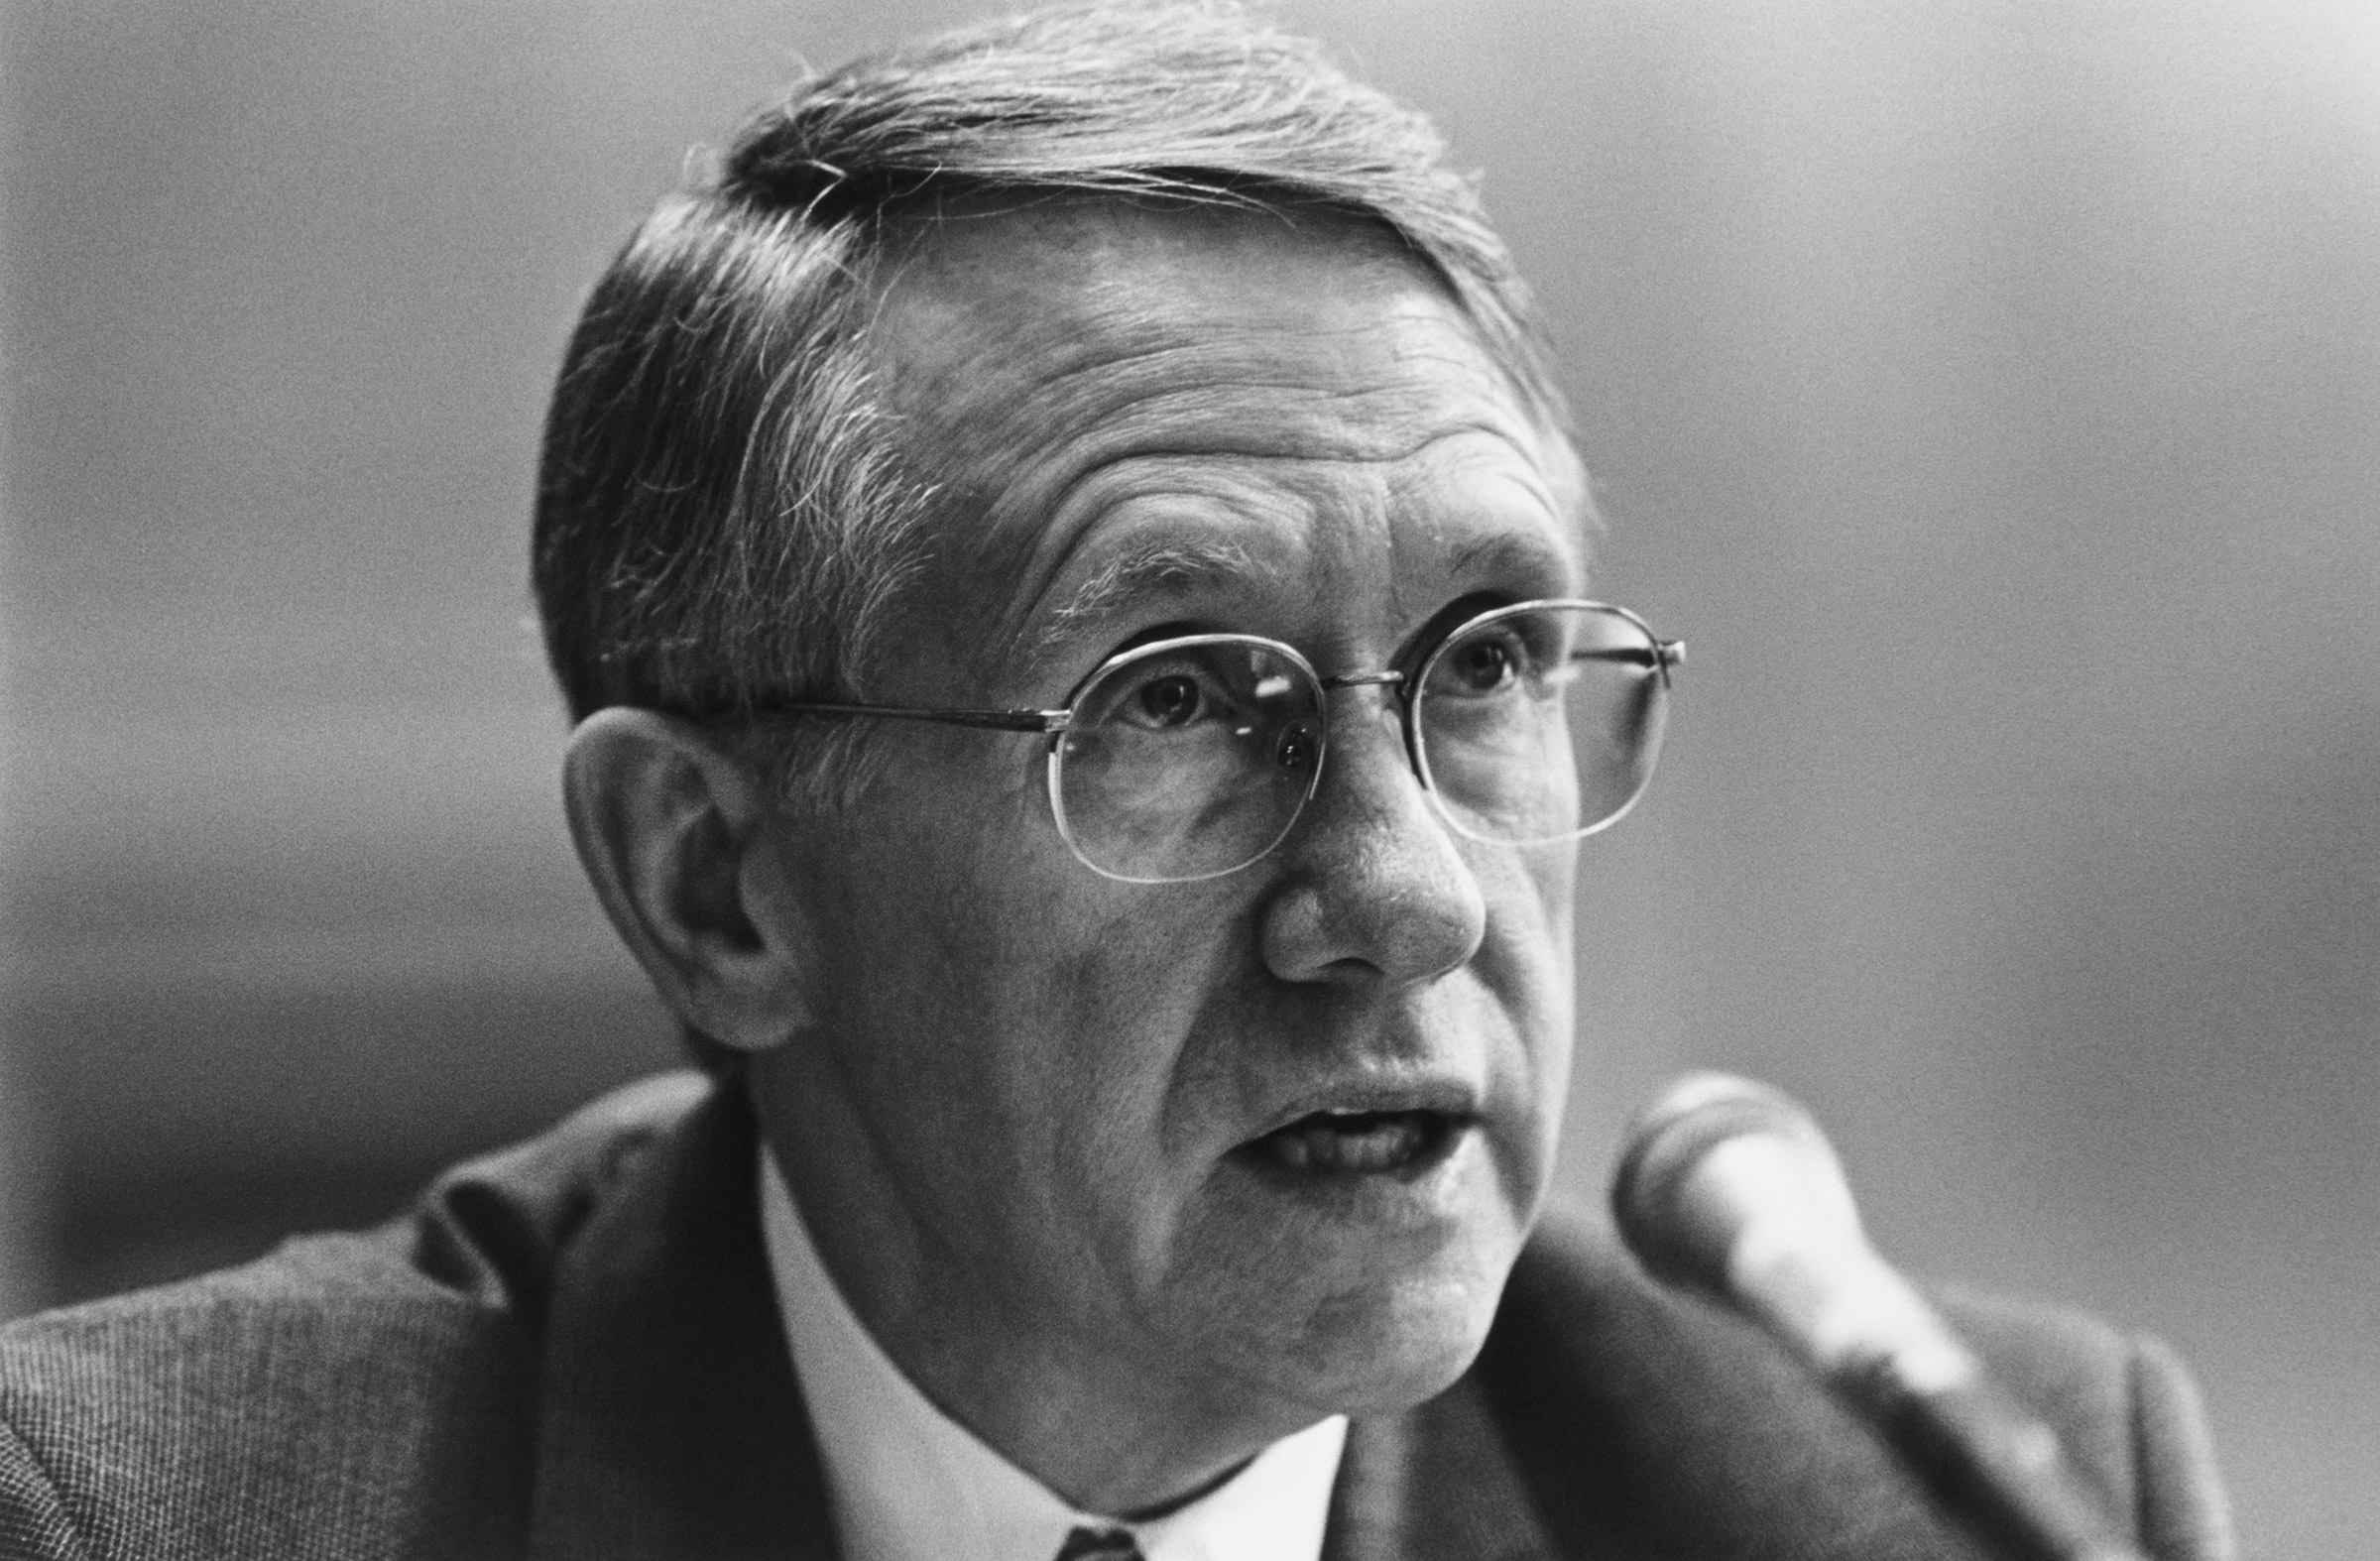 Sen. Harry Reid before Senate Government Affairs Commission on pension reform on Sep. 19, 1996. (Laura Patterson—CQ Archive/Getty Images)